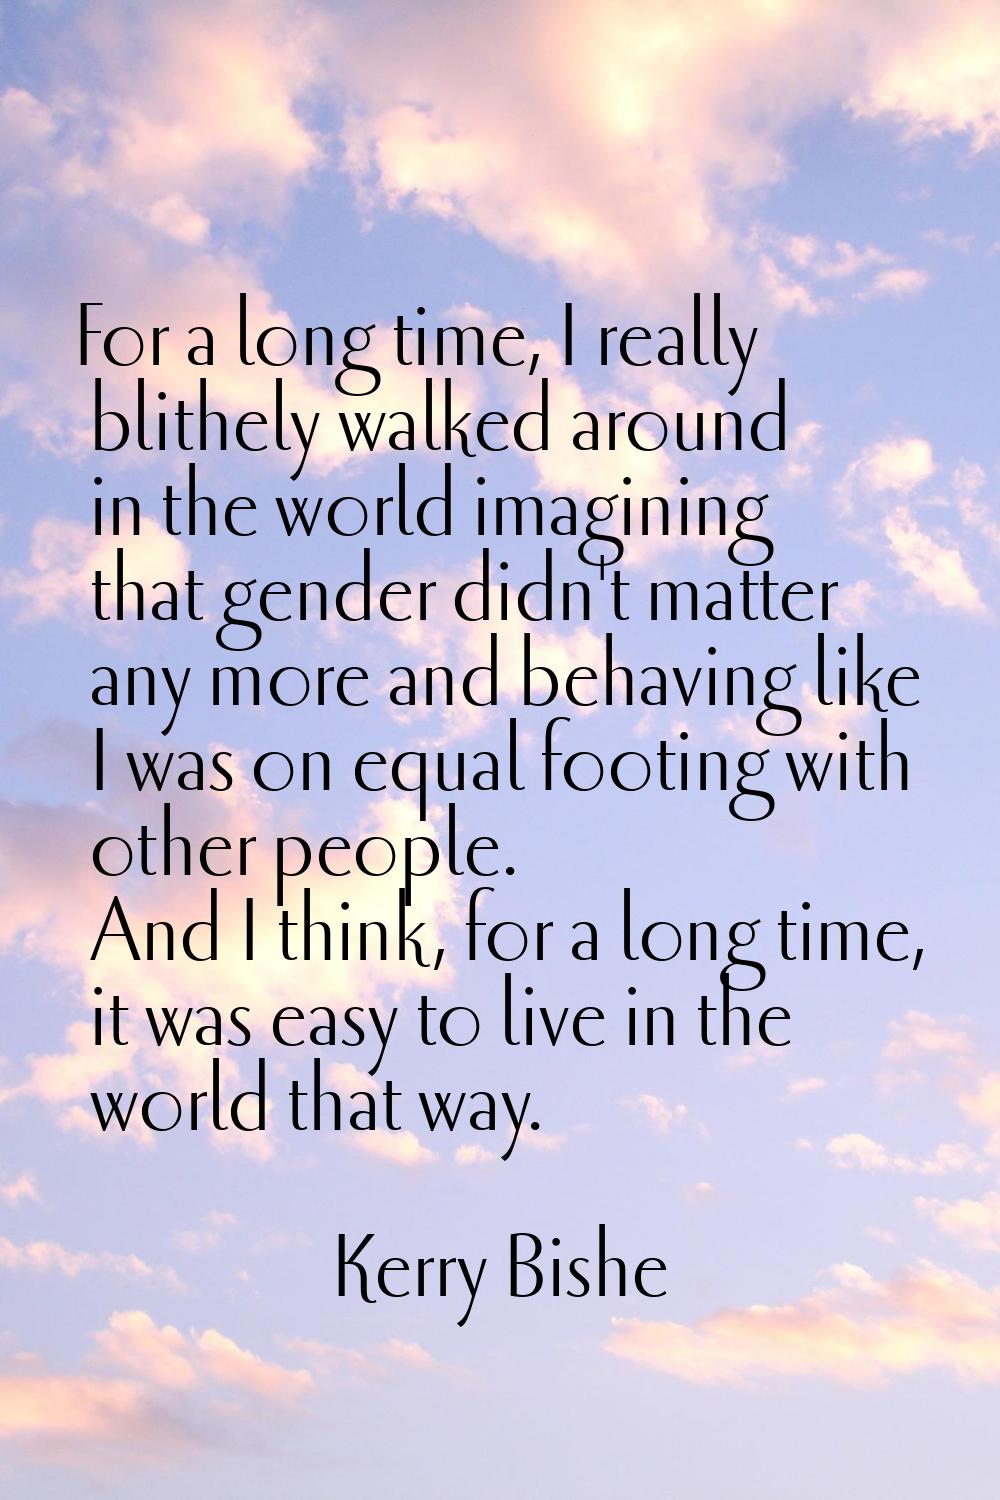 For a long time, I really blithely walked around in the world imagining that gender didn't matter a